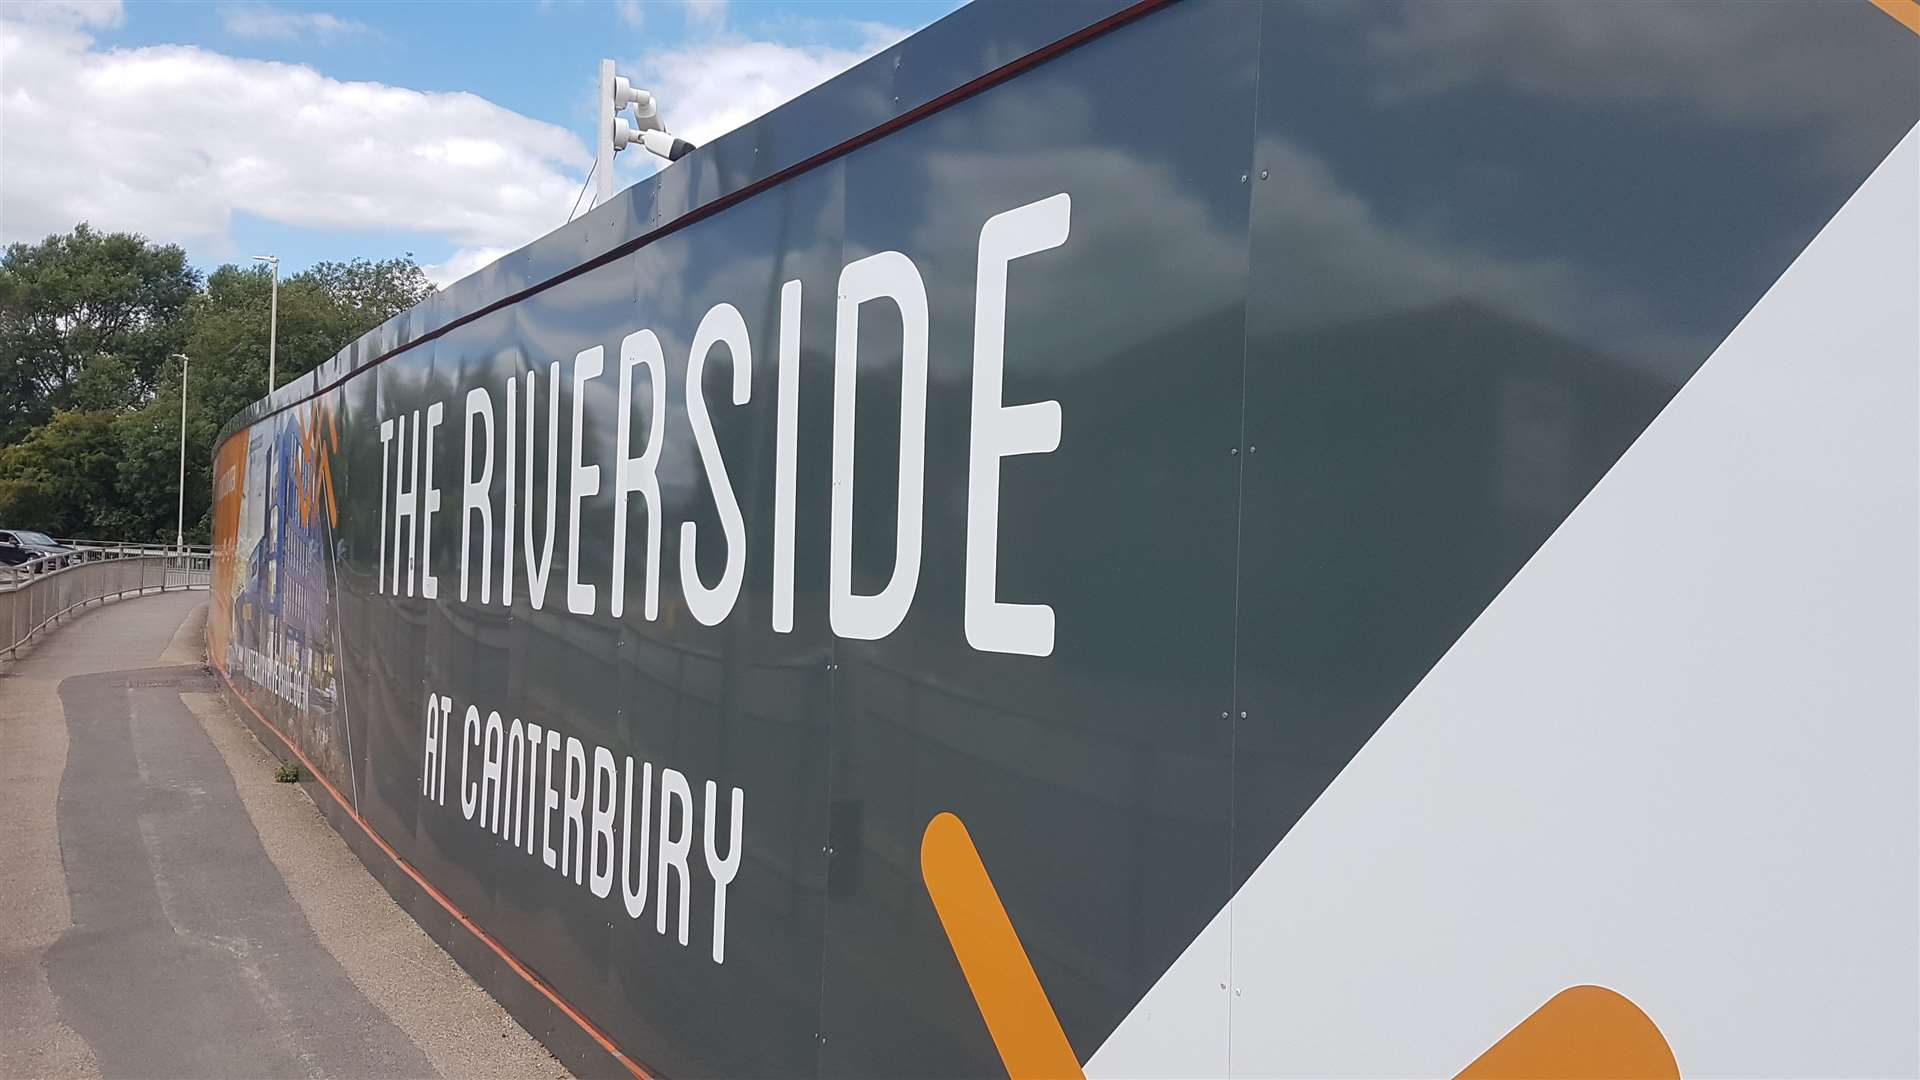 The Riverside site is due to be open next summer